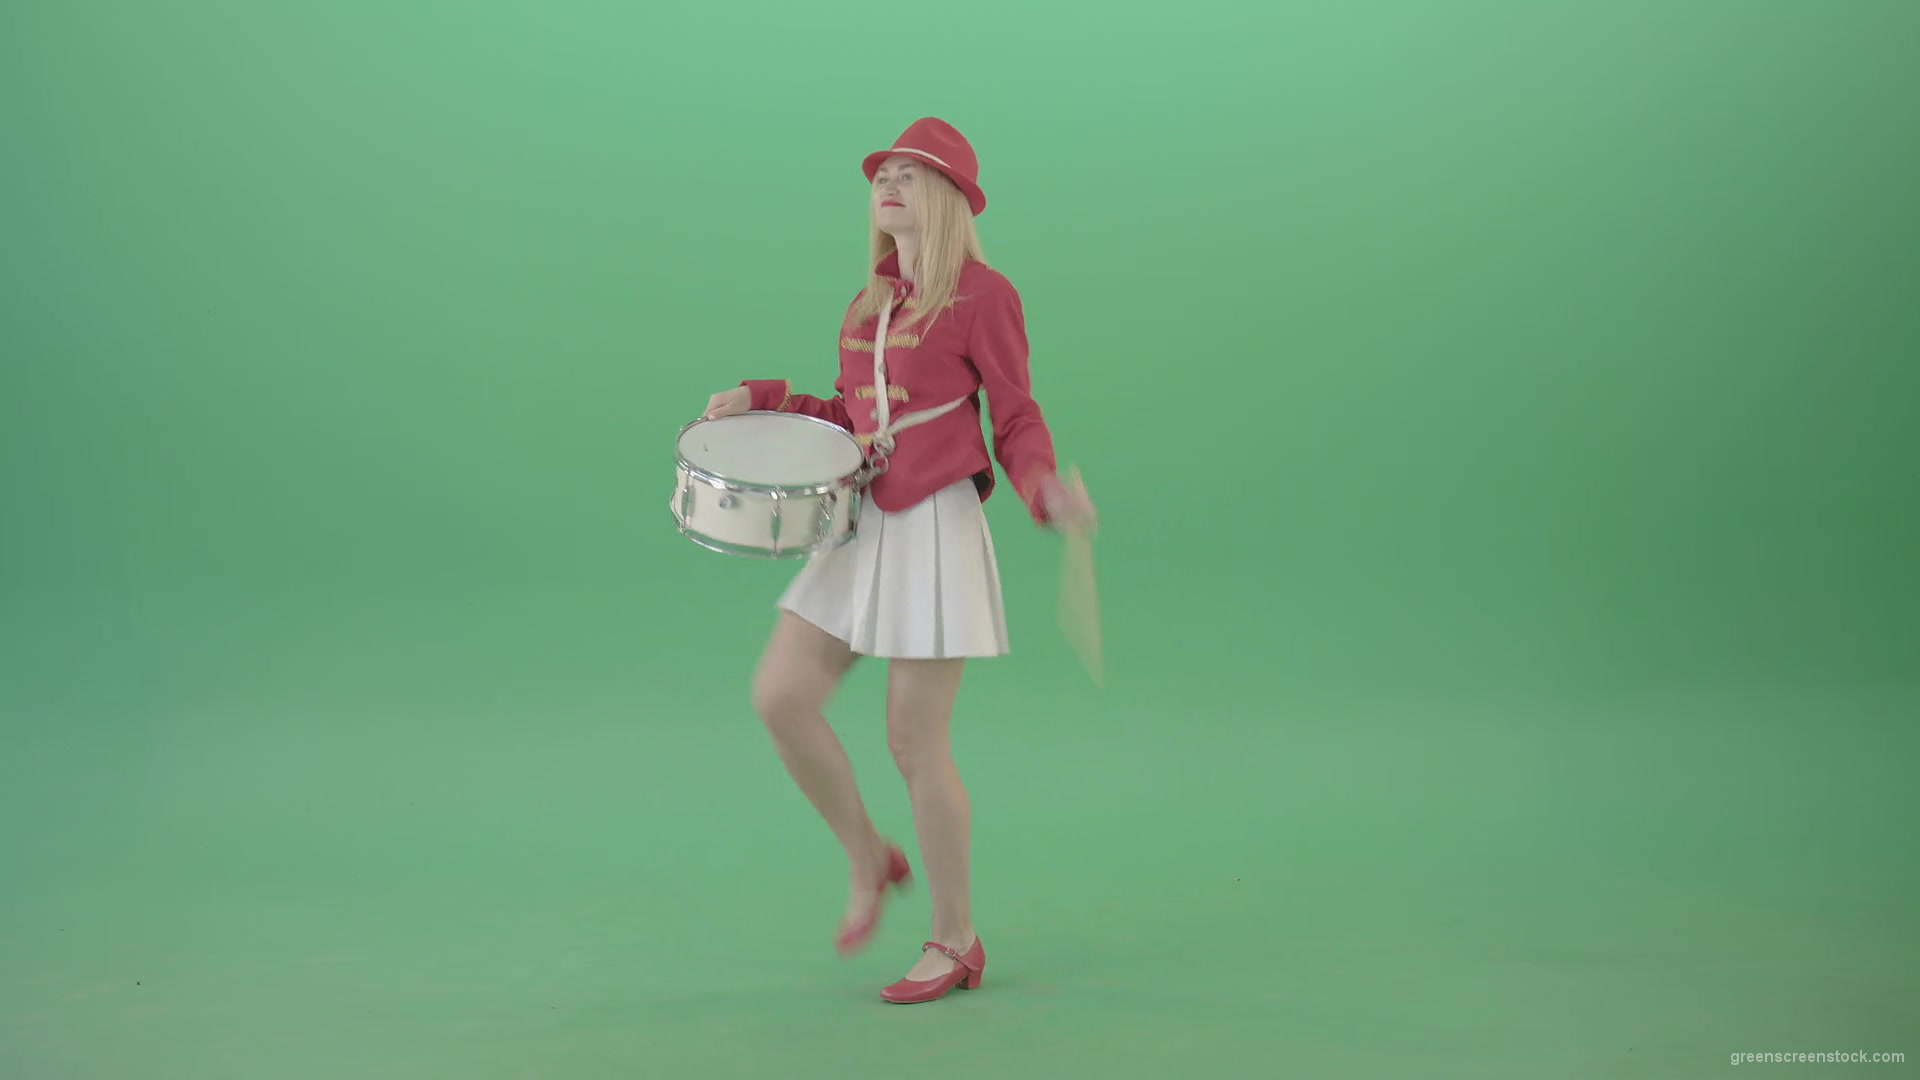 Red-Costume-Girl-in-Side-view-marching-on-green-screen-and-playing-snare-drum-4K-Video-Footage-1920_006 Green Screen Stock